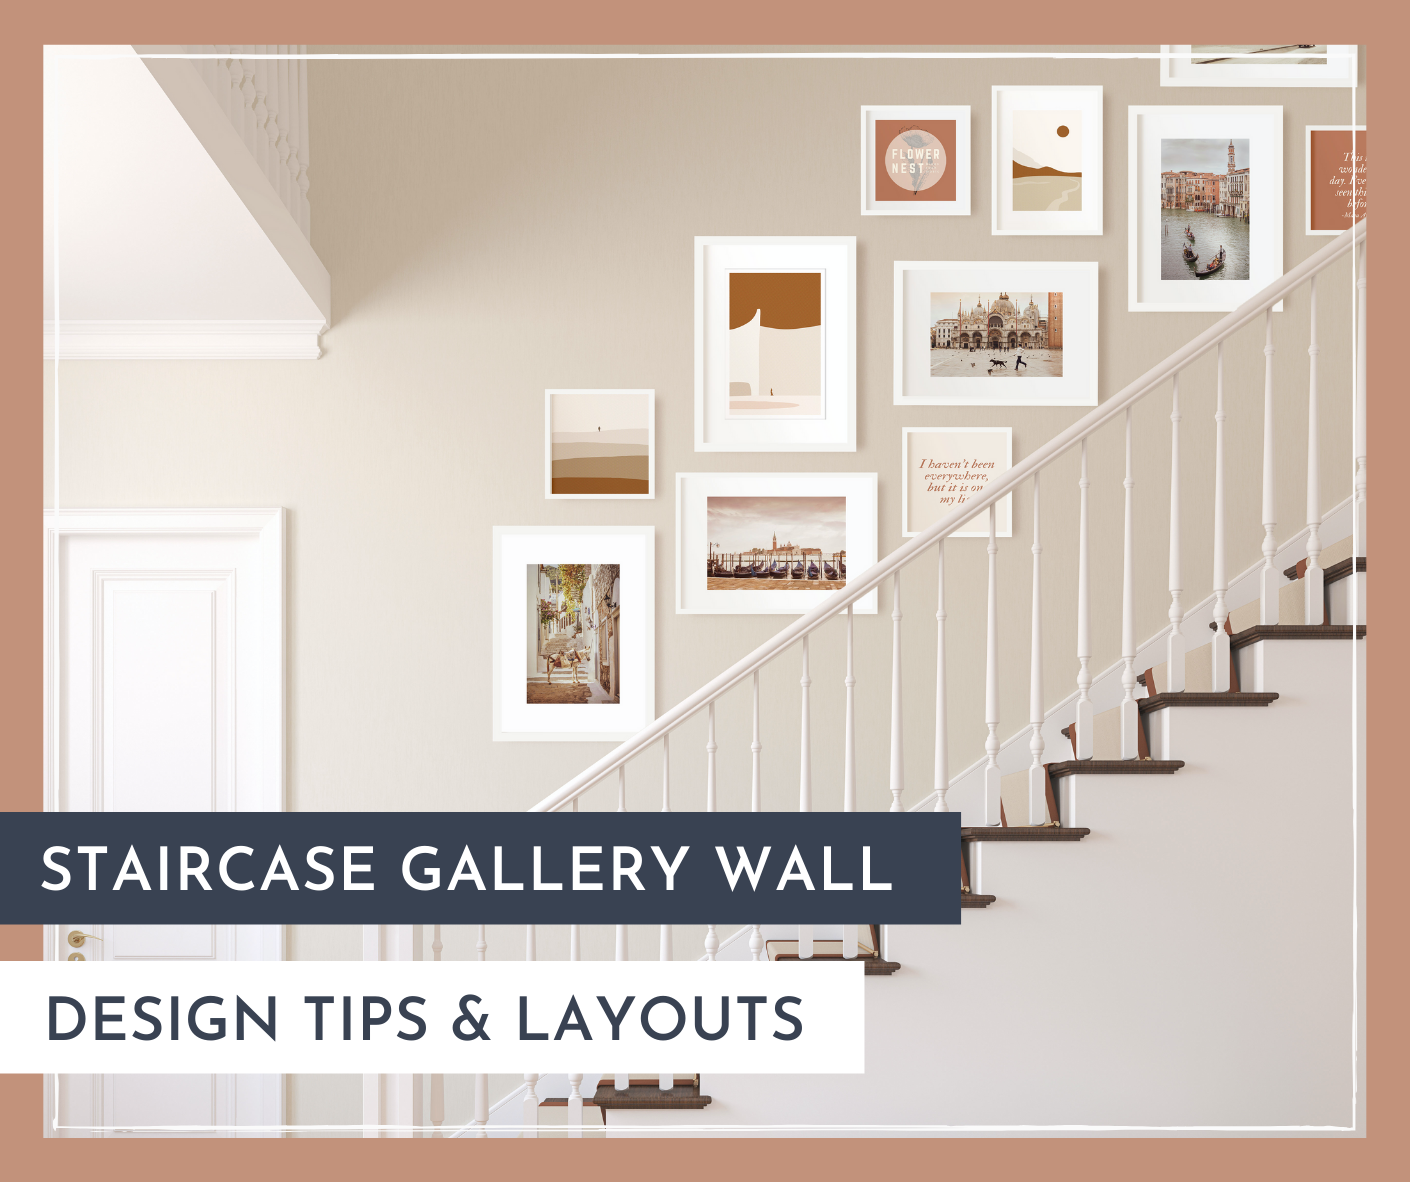 Staircase Gallery Wall: Design Tips & Layouts - Mk Envision Galleries